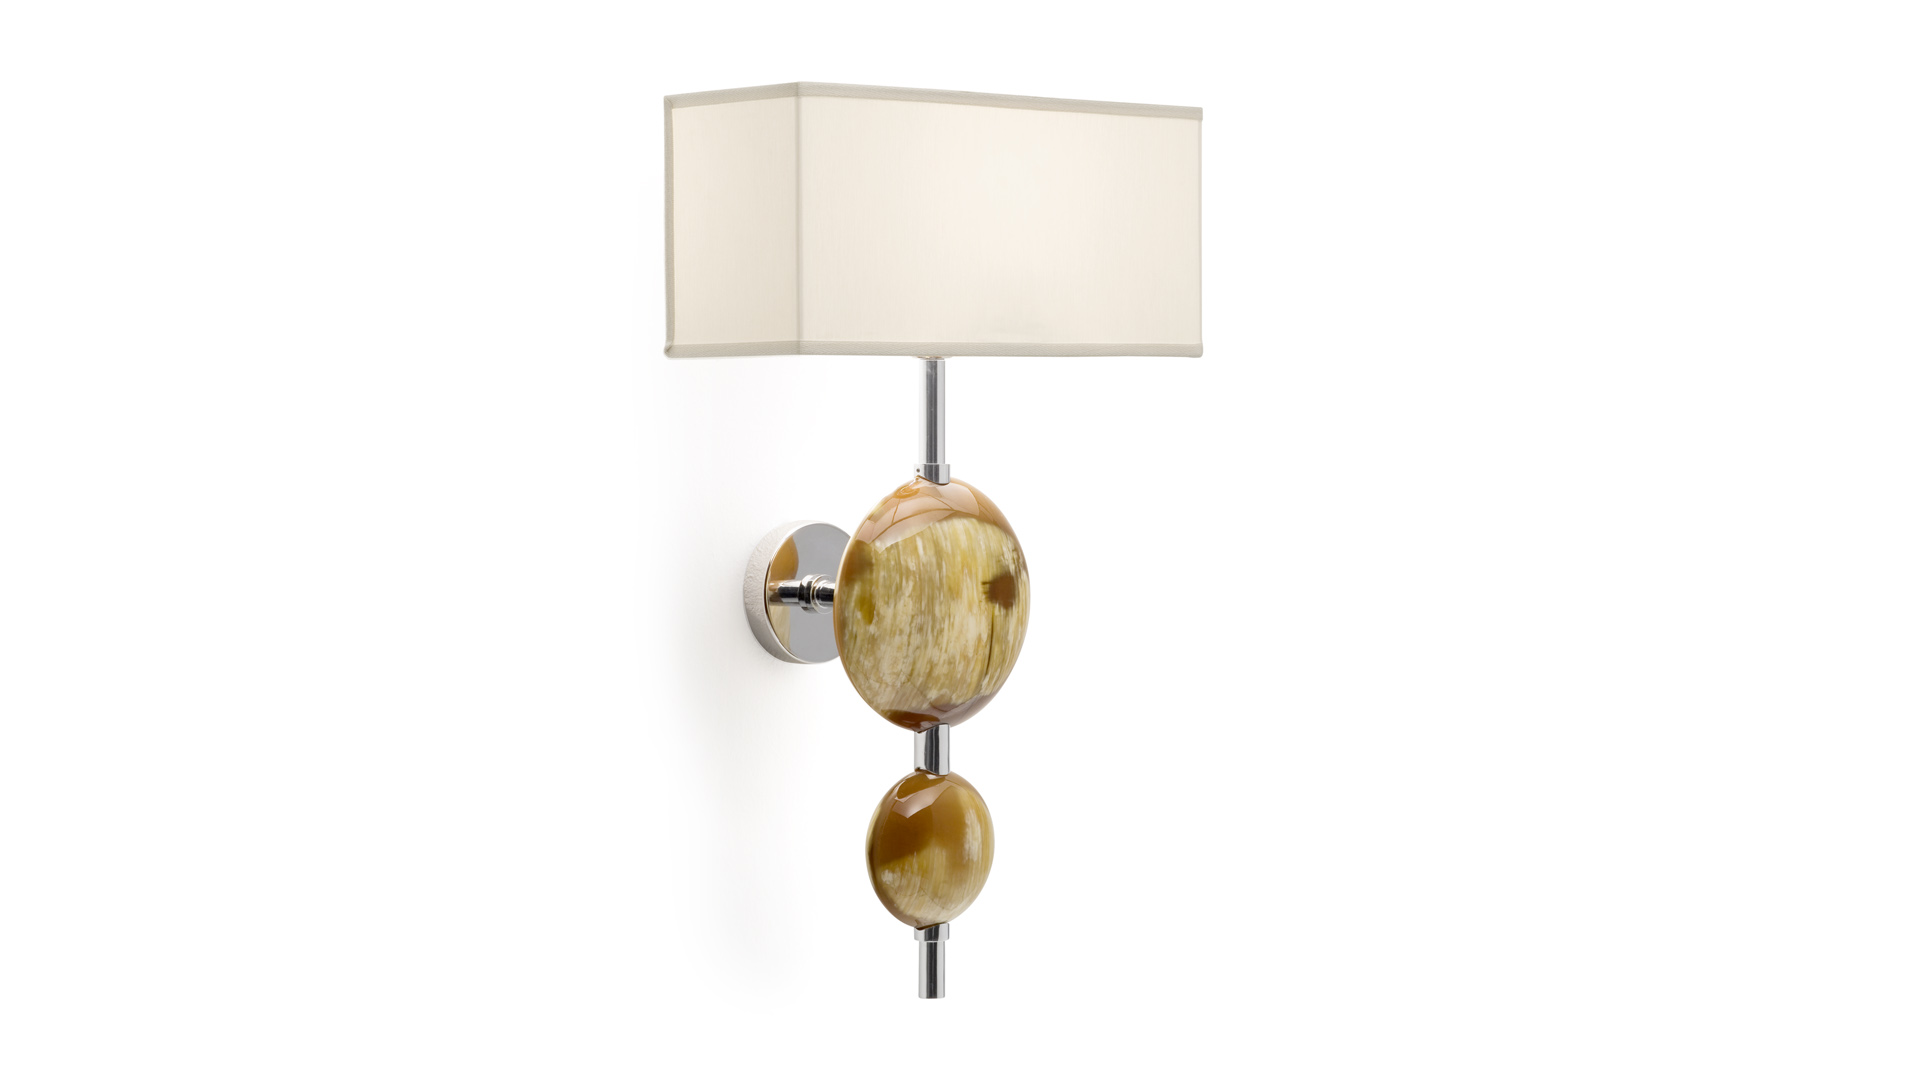 Lamps - Vittoria wall sconce in horn and stainless steel - cover - Arcahorn